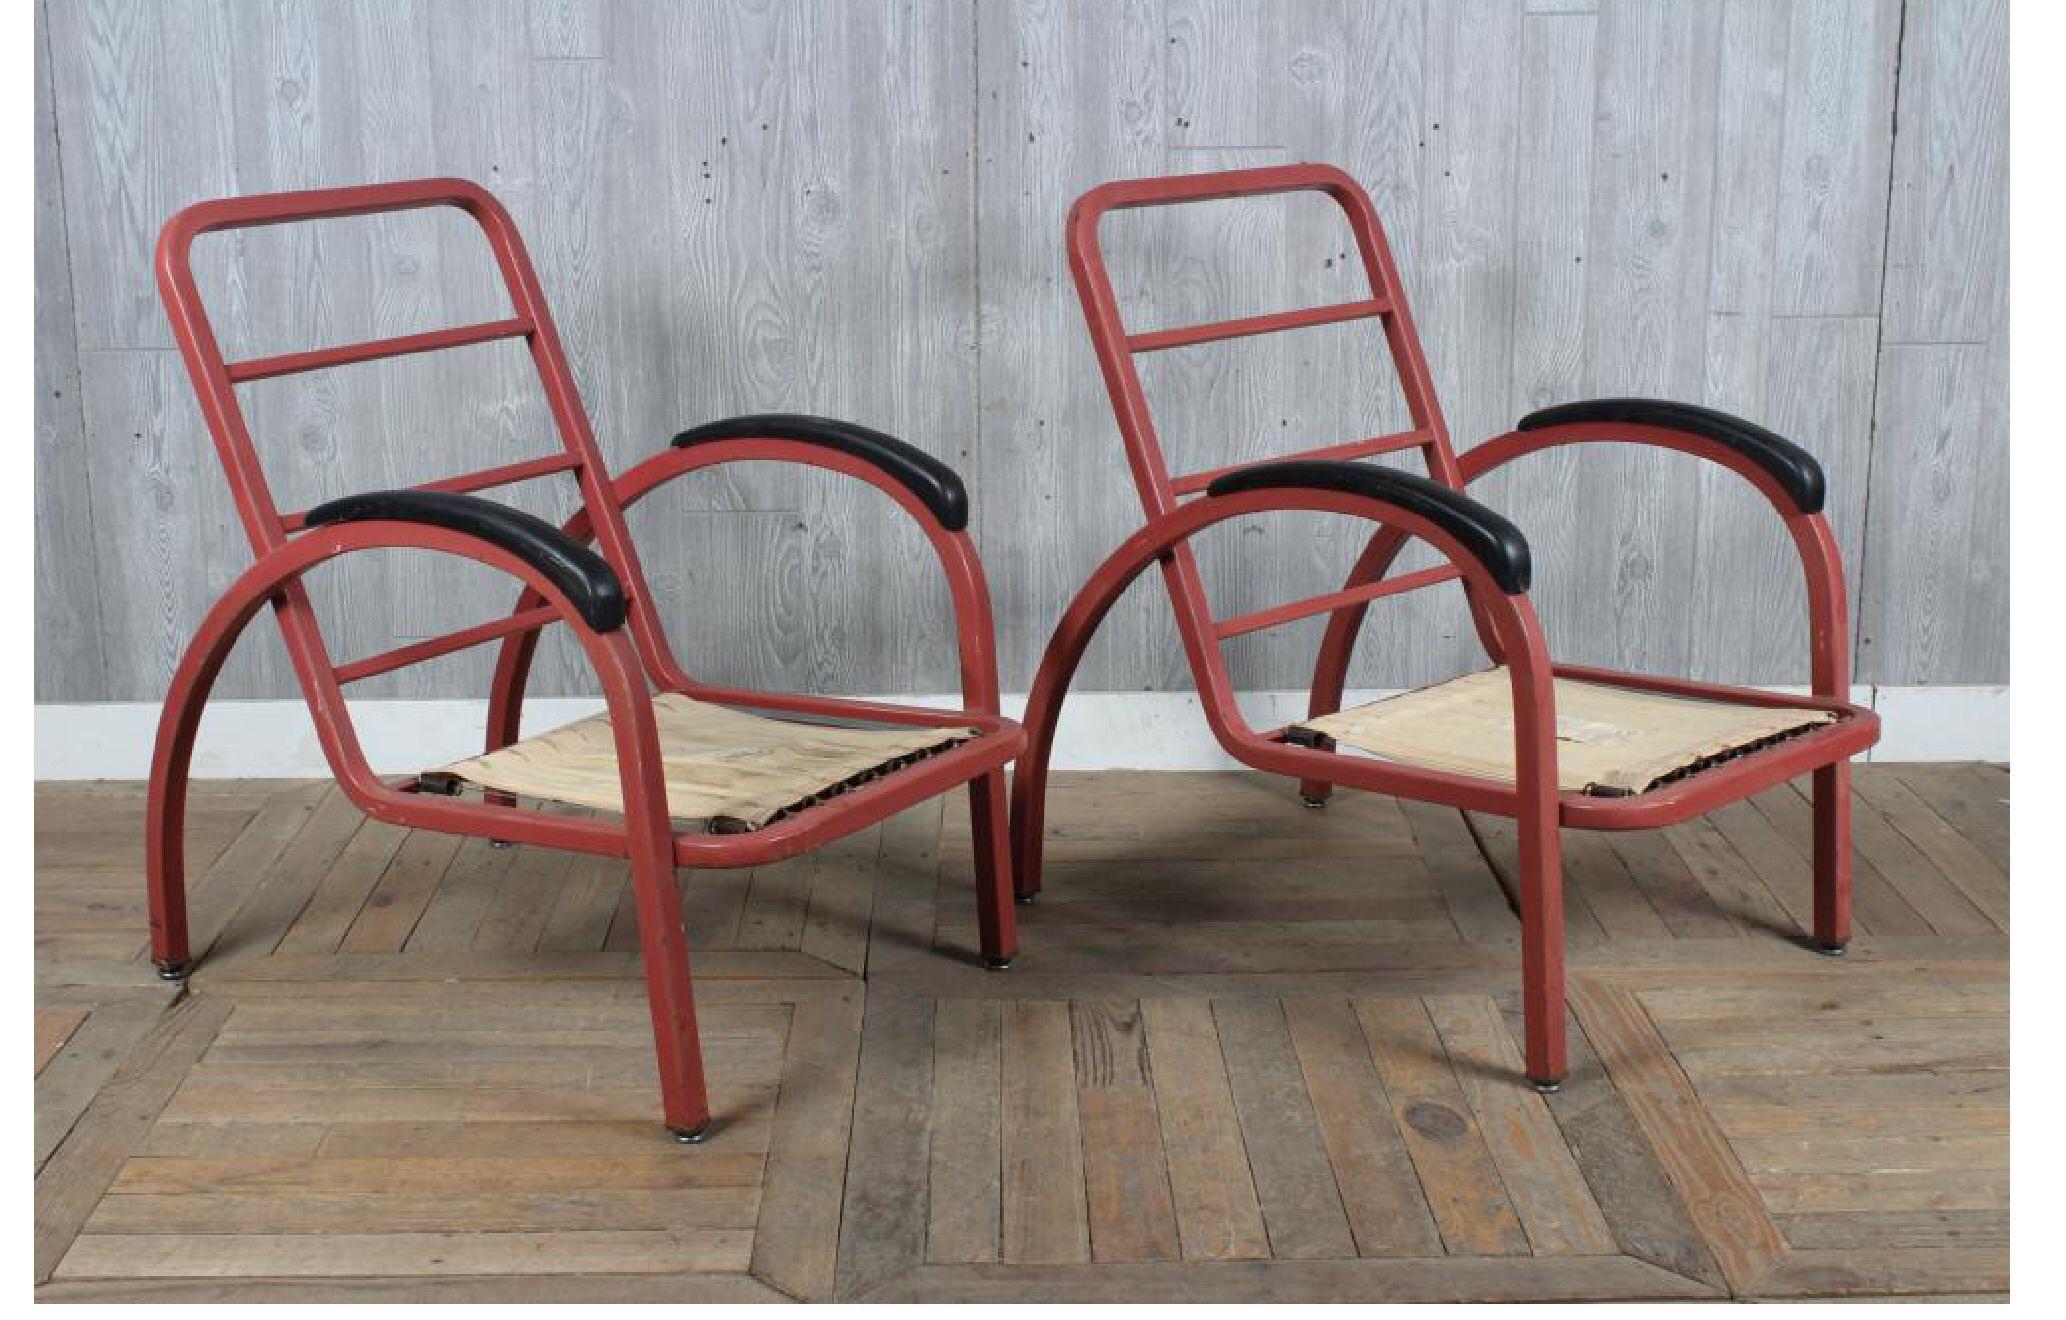 Rare set of enameled steel lounge chairs designed by Norman Bel Geddes in 1929. The Simmons Company enjoyed a reputation as the leading seller of steel furniture throughout the interwar years (1920s-1930s), having introduced the first metal bedroom